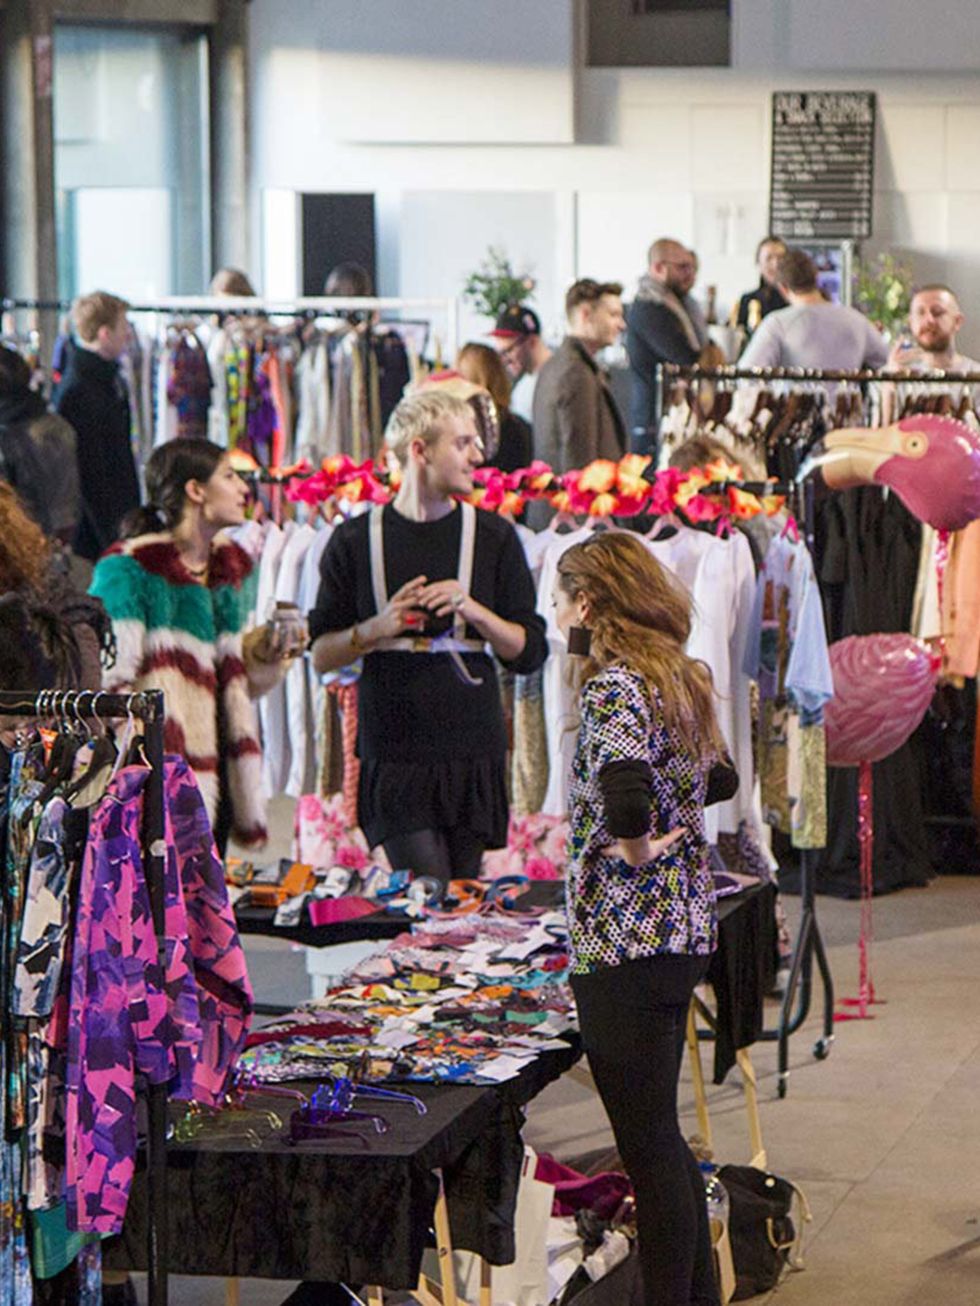 &lt;p&gt;&lt;strong&gt;FASHION MARKET: This Sunday at Bethnal Green Oval Space&lt;/strong&gt;&lt;/p&gt;&lt;p&gt;A fantastic fashion market for the savvy buyer; pick up clothing from a range of 25 designers whilst enjoying food, drinks and live music. Both